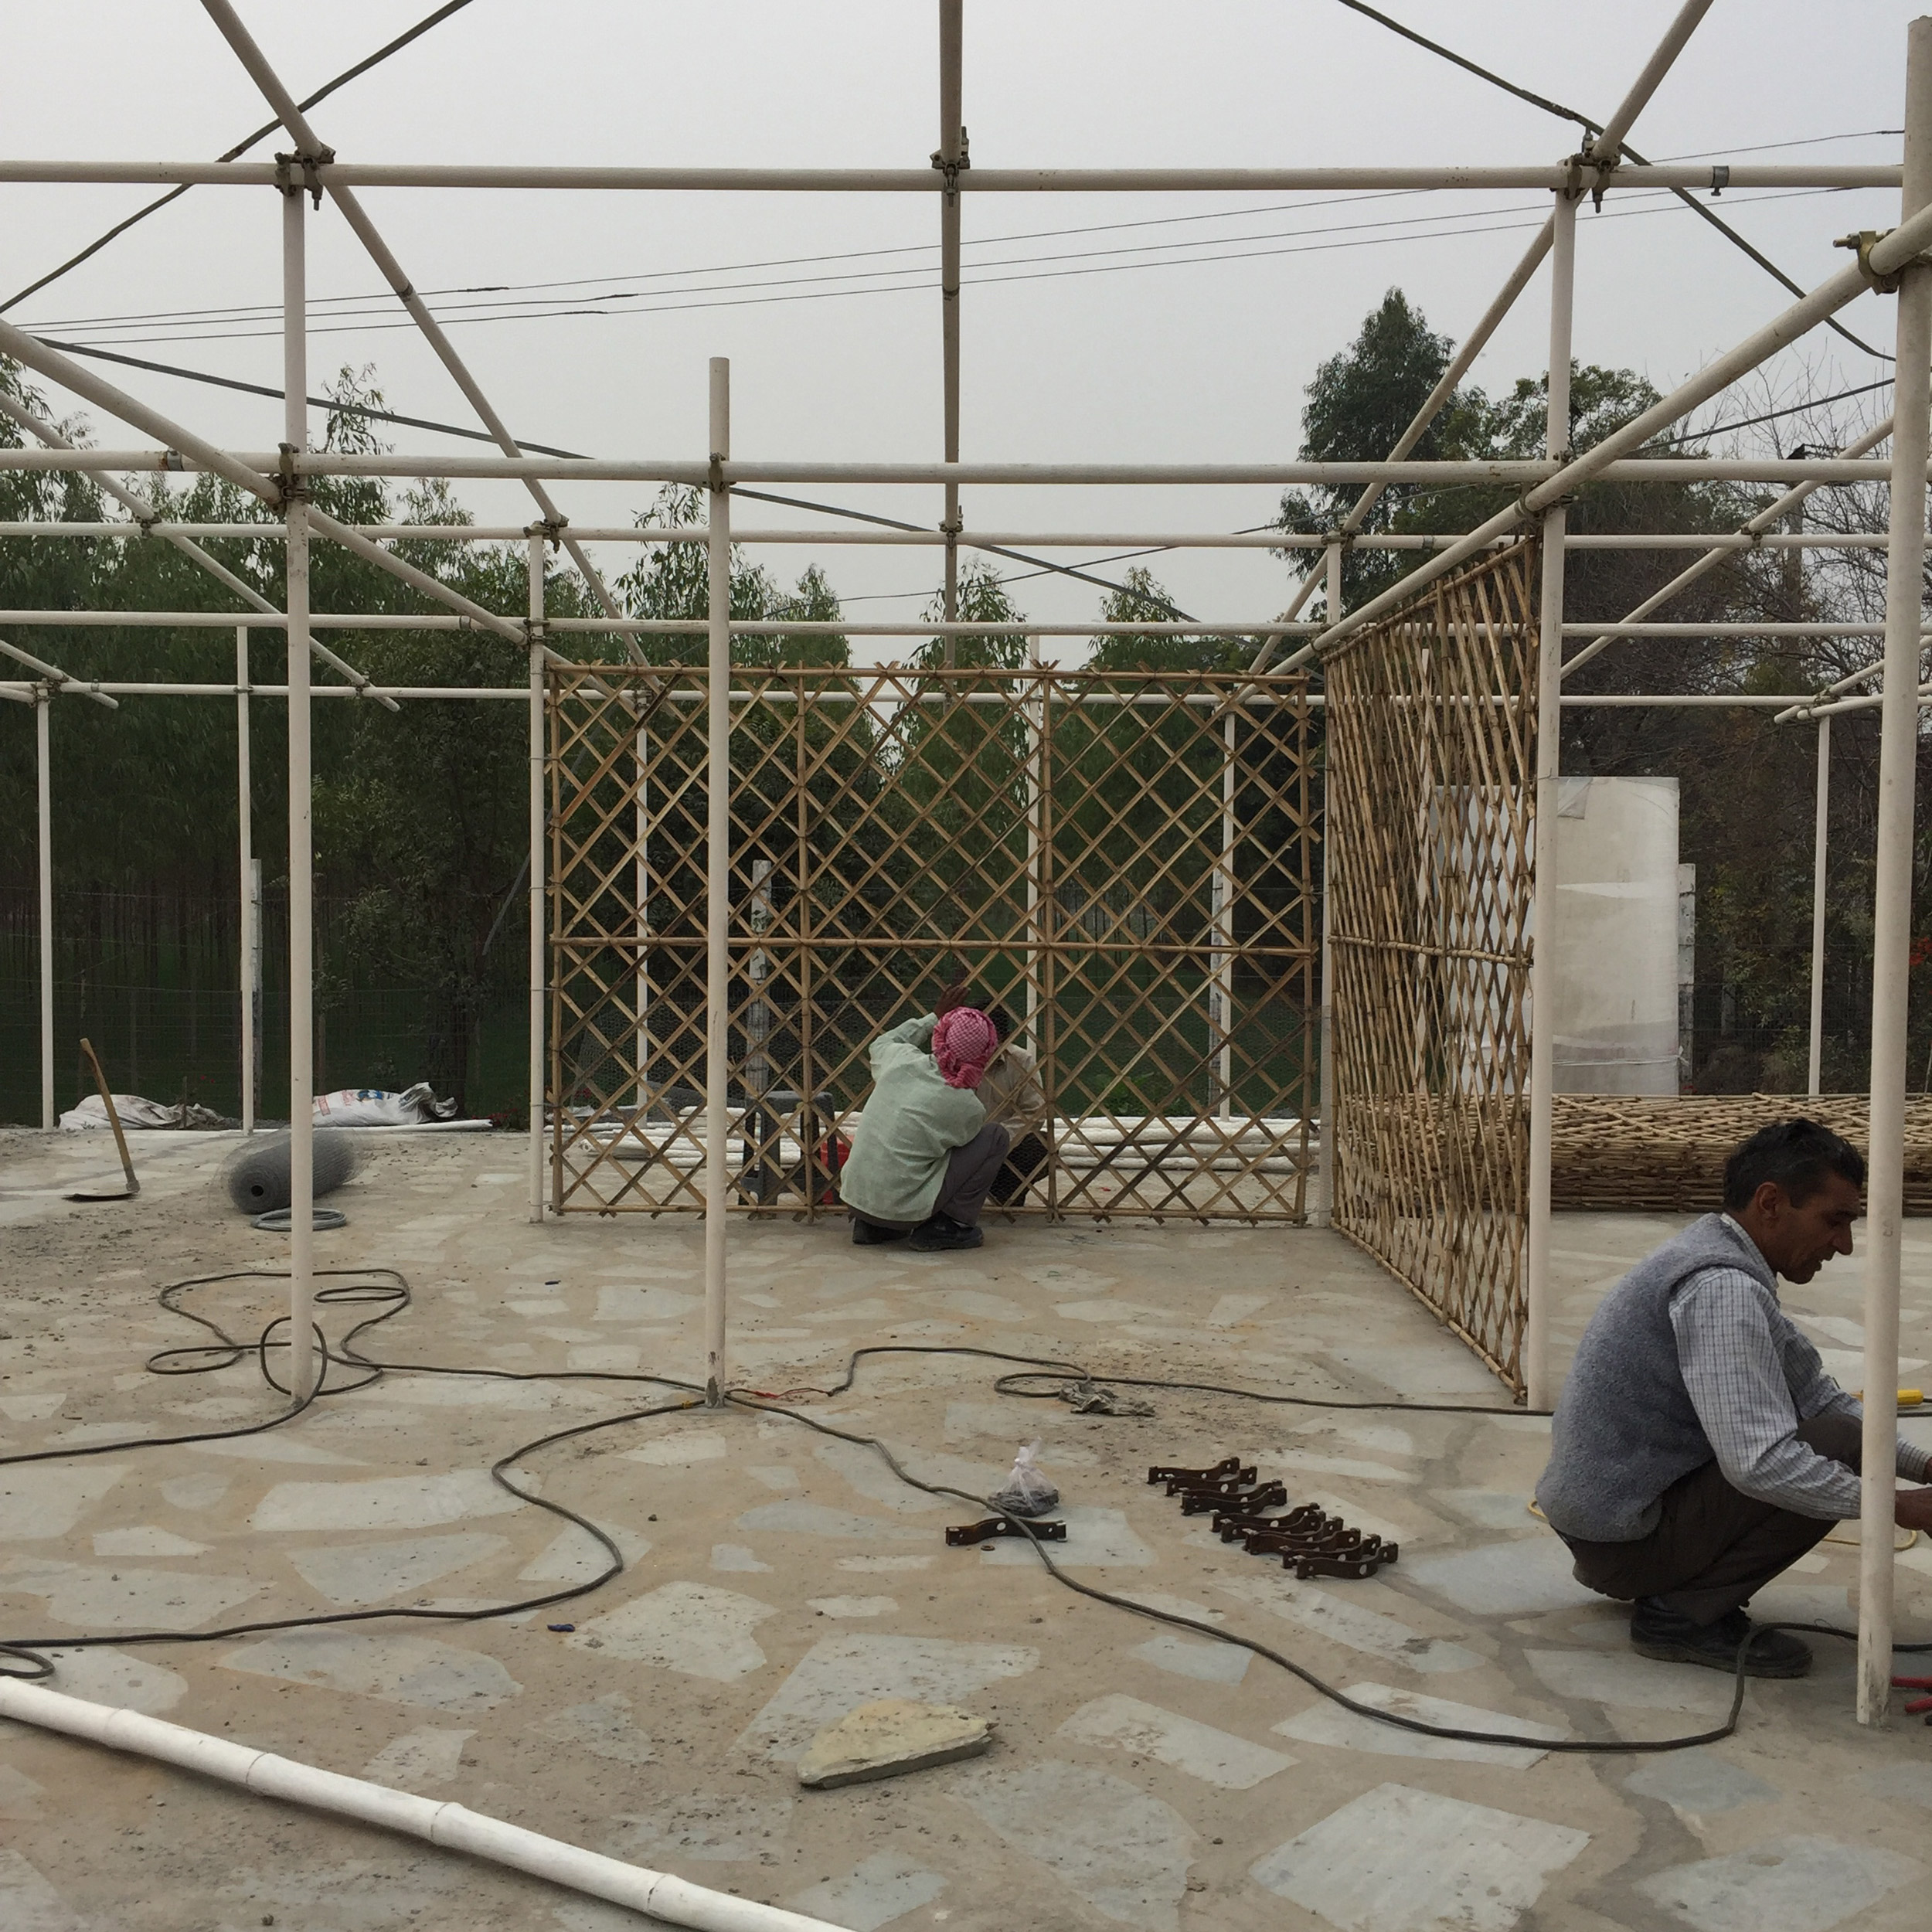 Workers' Housing Prototype in Haryana, India, by Hatch Workshop. Photo: Courtesy Hatch Workshop.